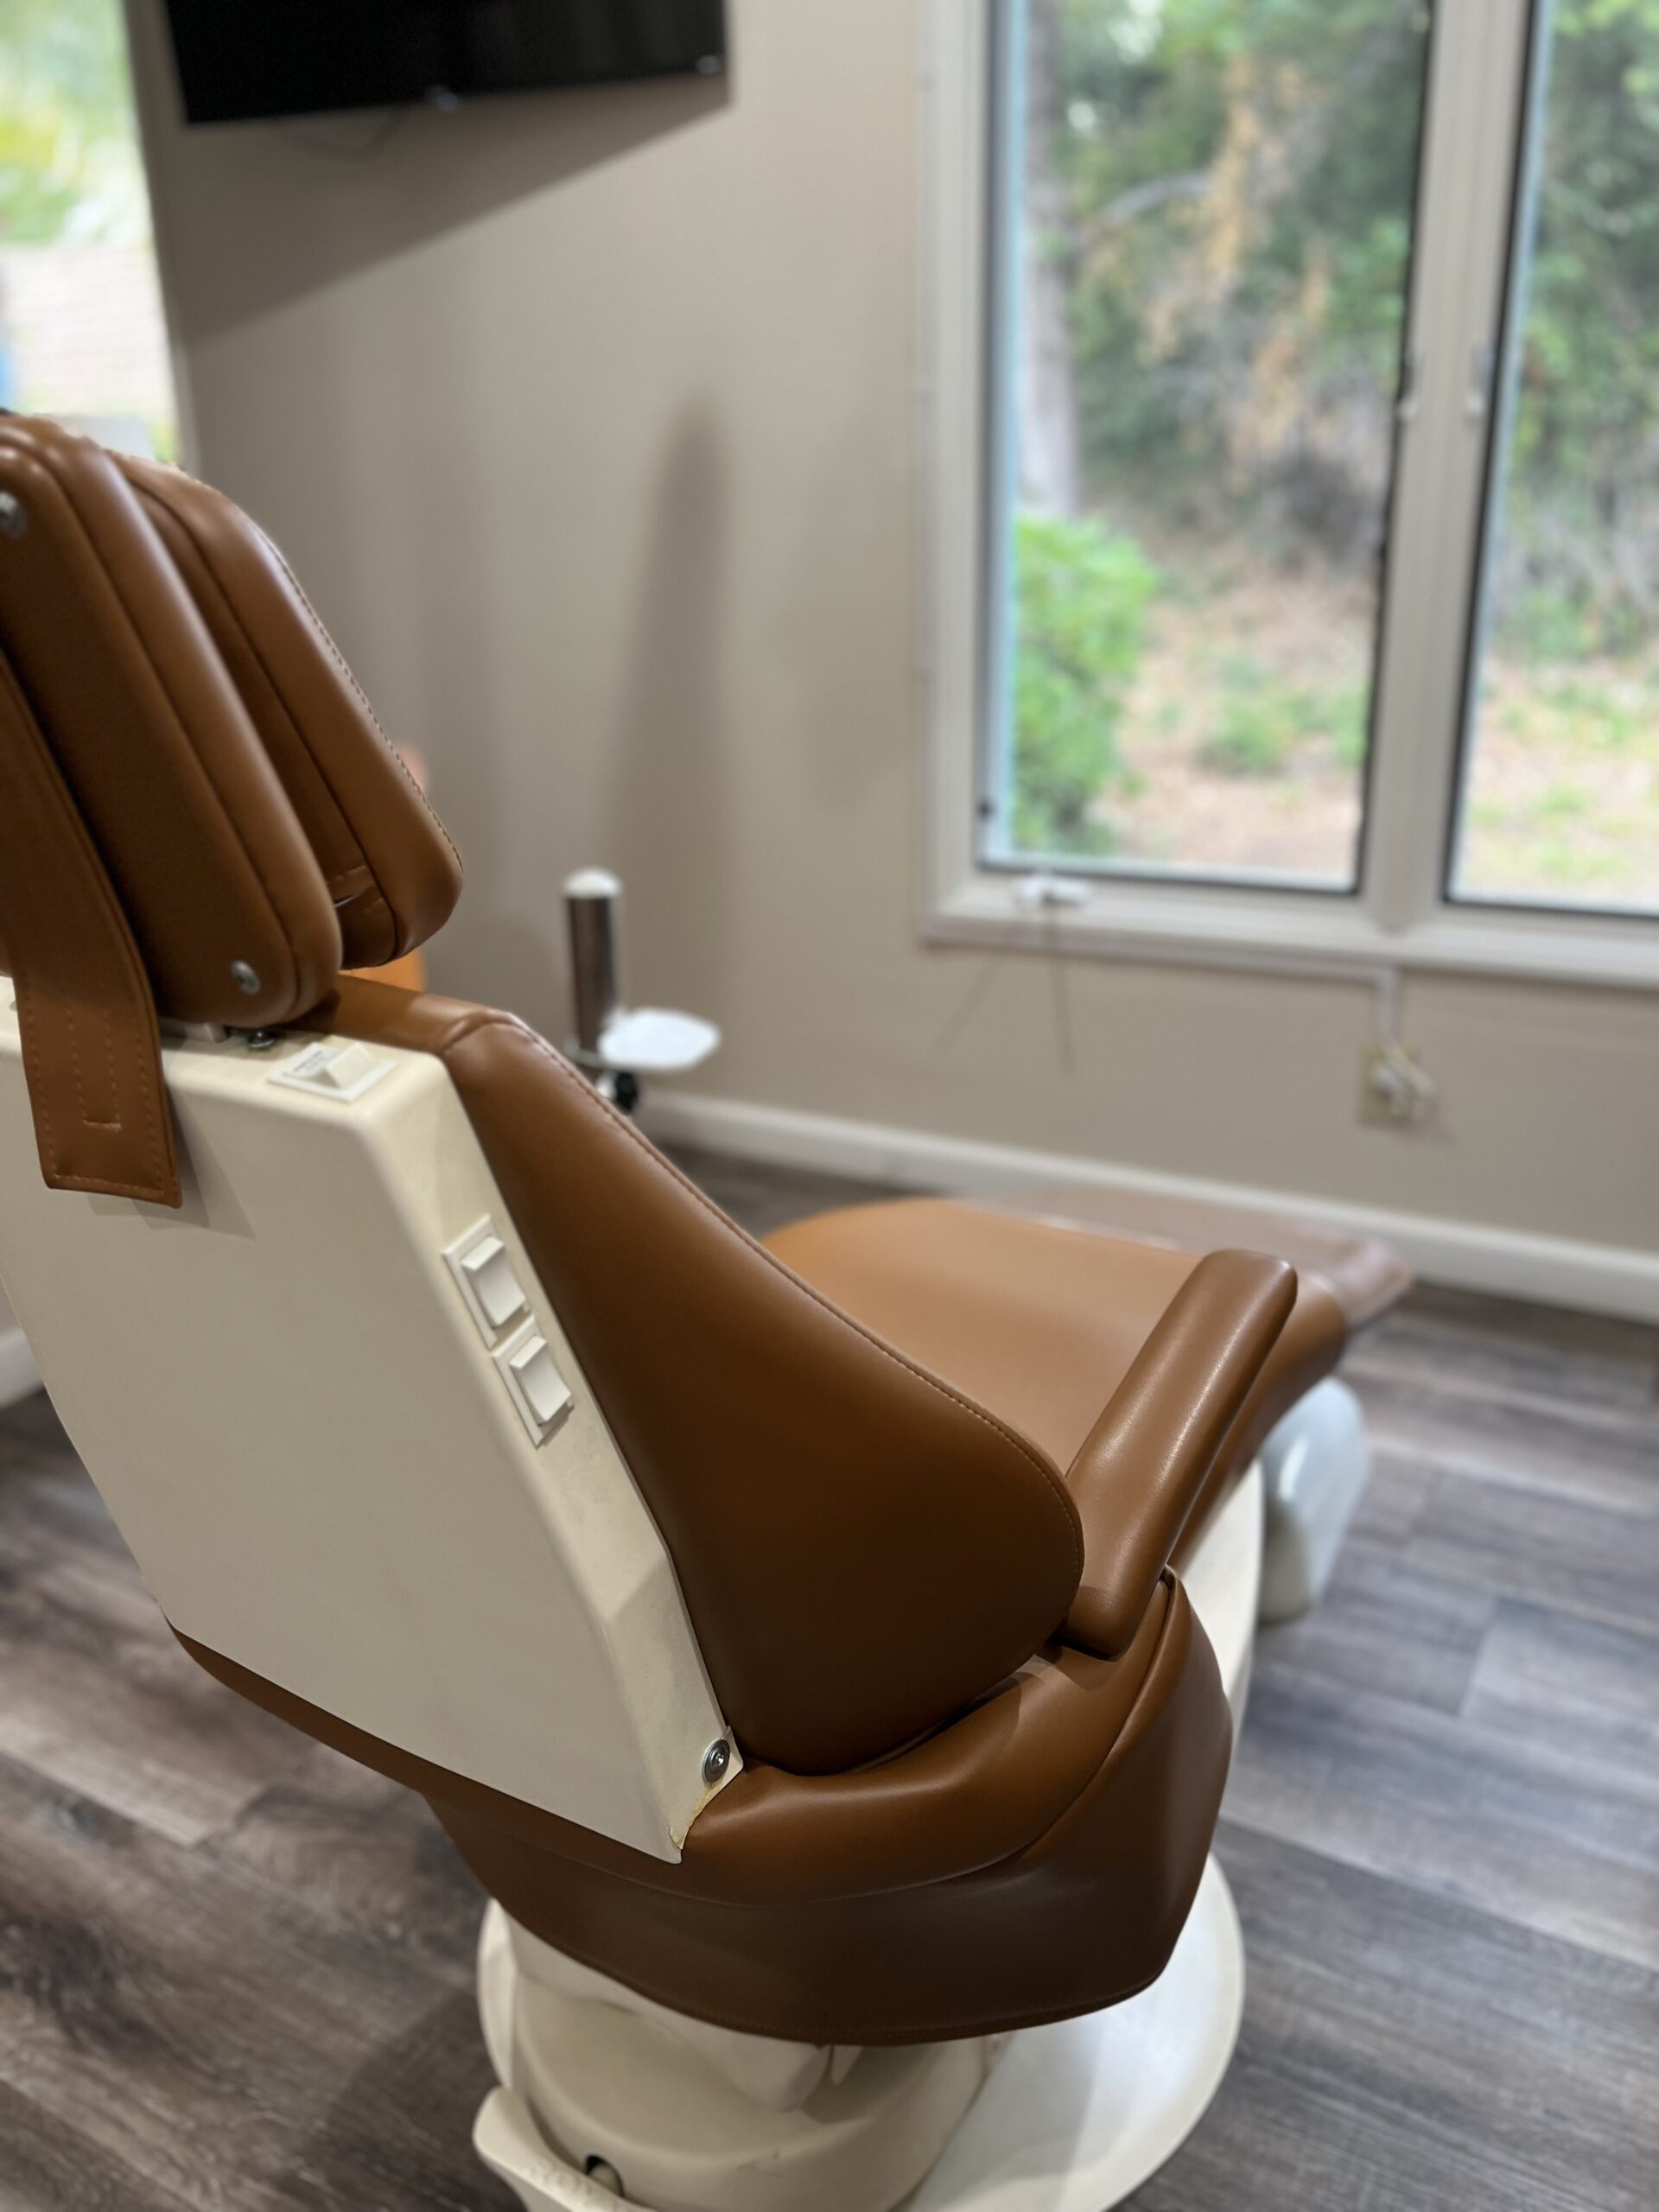 simi-valley-family-dental-office-chair